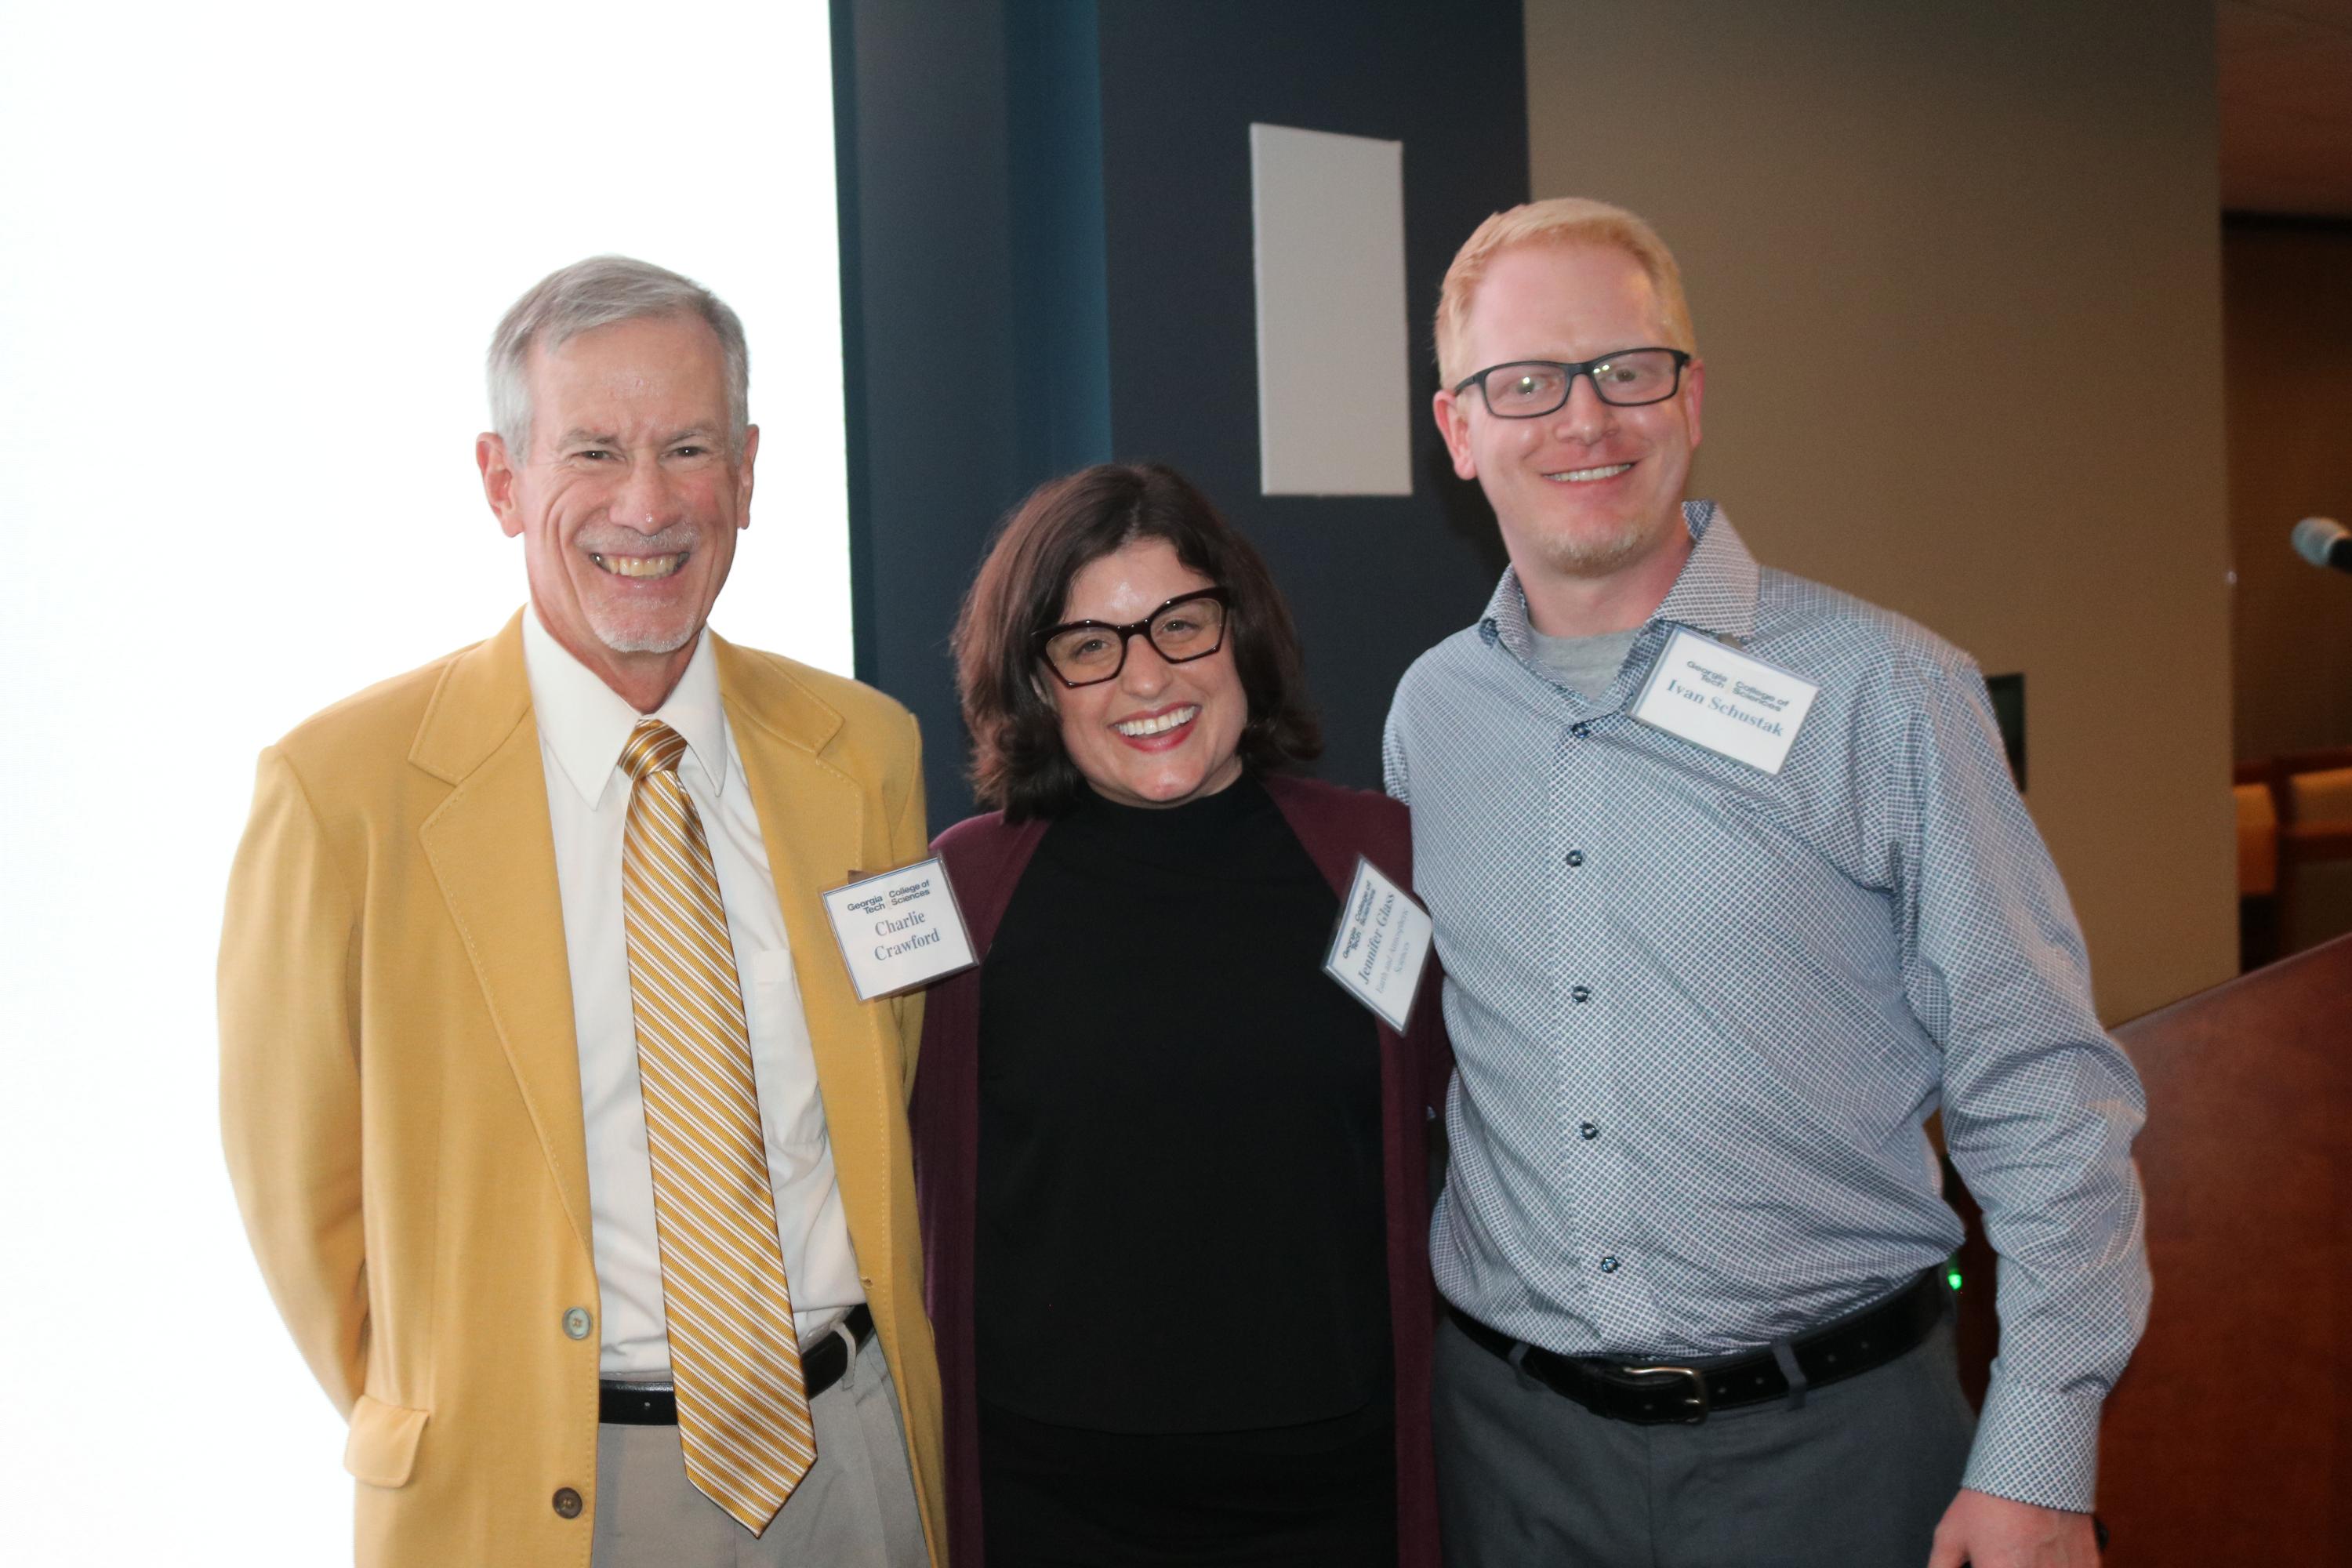 From left: Charles Crawford, Jennifer Glass, and Ivan Schustak (Photo by Renay San Miguel)